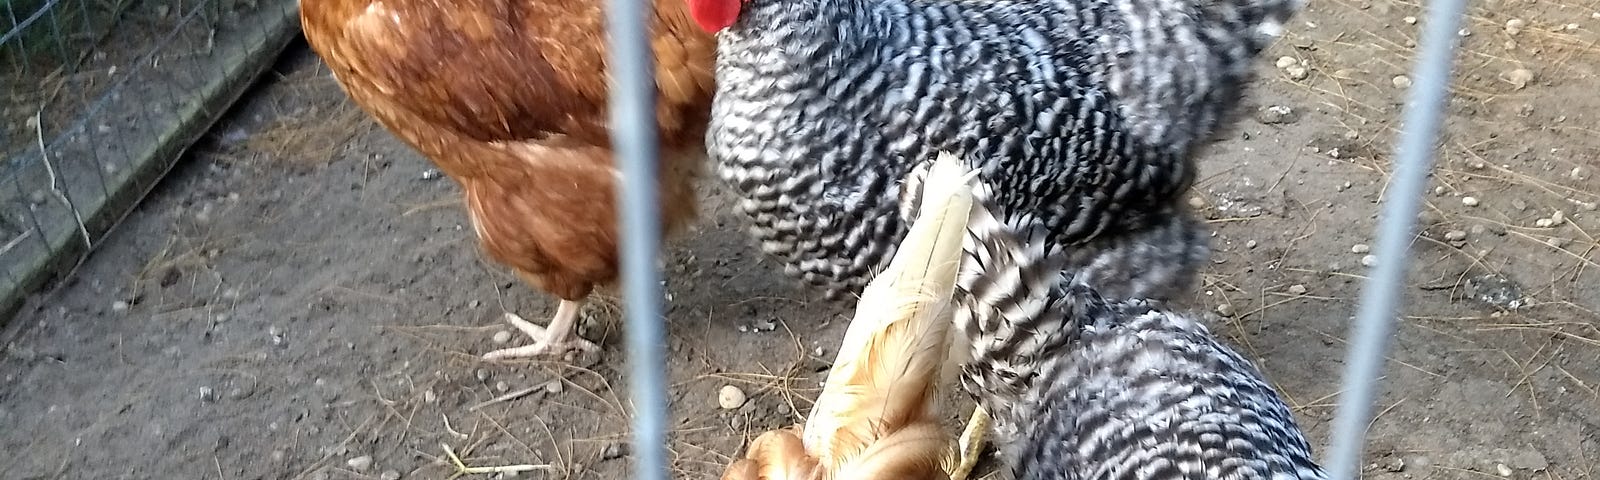 Two Red Stars (a subbreed of the more famous Rhode Island Red) and two Barred Rocks wait for their breakfast. Copyright 2021 Susan B. Scheck.